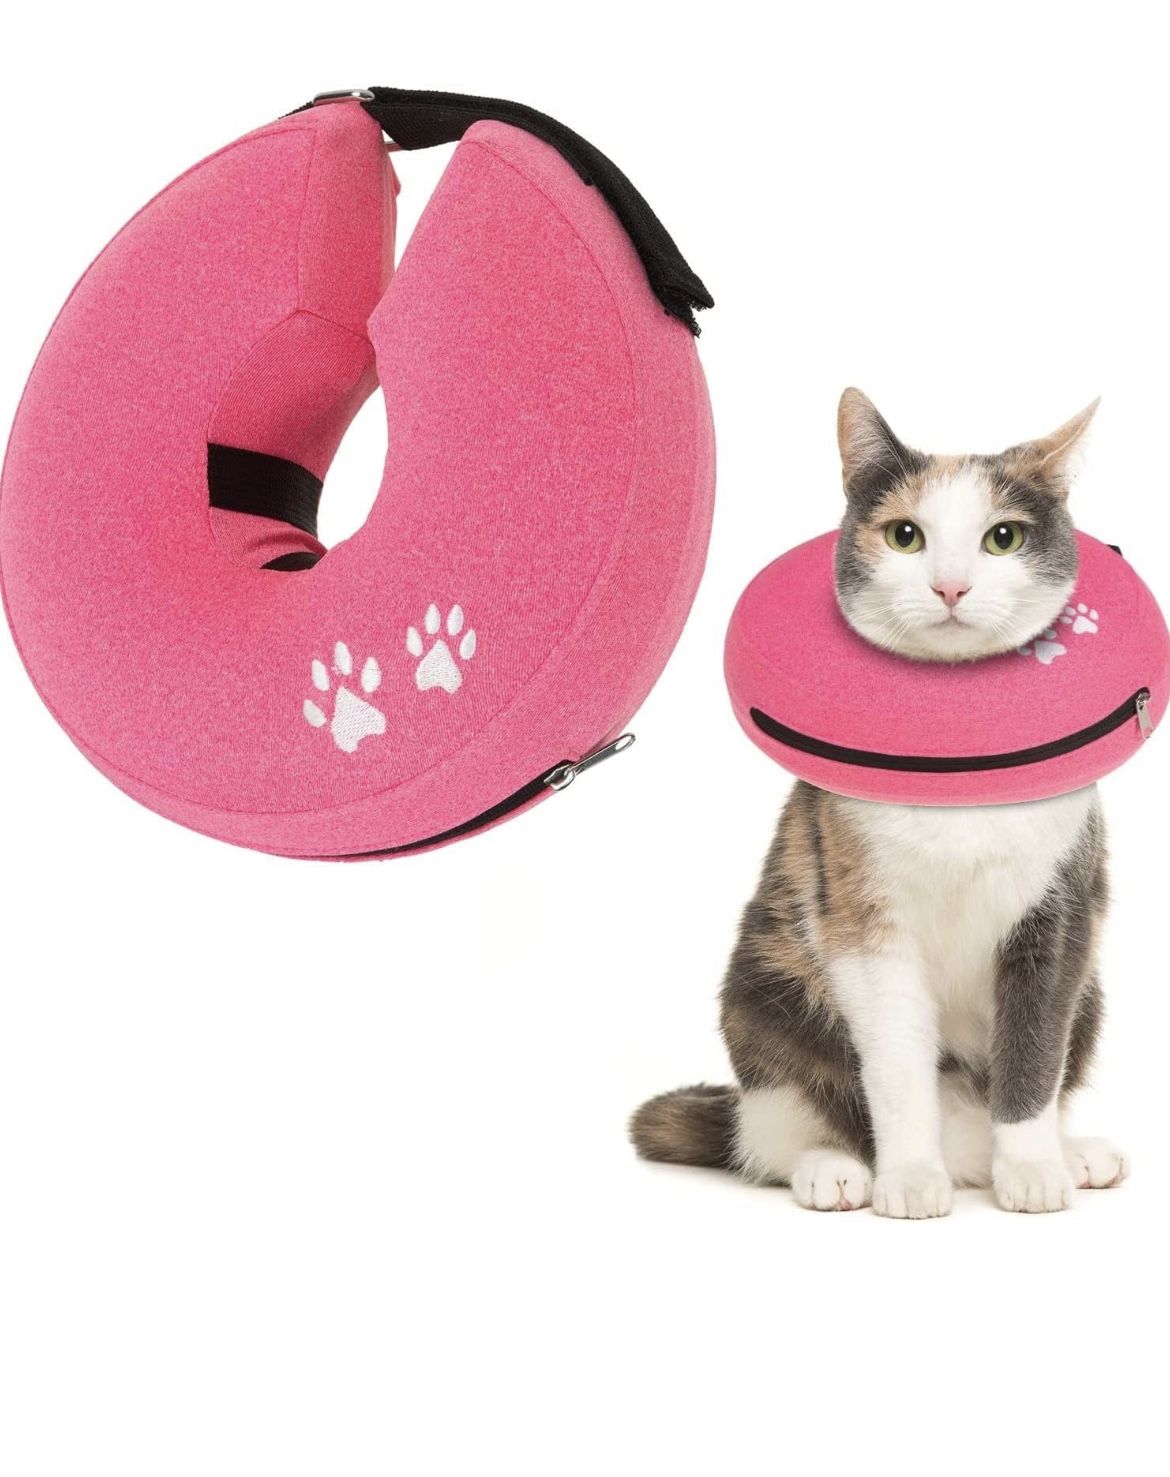 Cat Cone Collar Soft, Adjustable in Inflatable Recovery Collar for Kittens Small Dogs, Pet Neck Donut for After Surgery, Easy Clean Comfortable Small